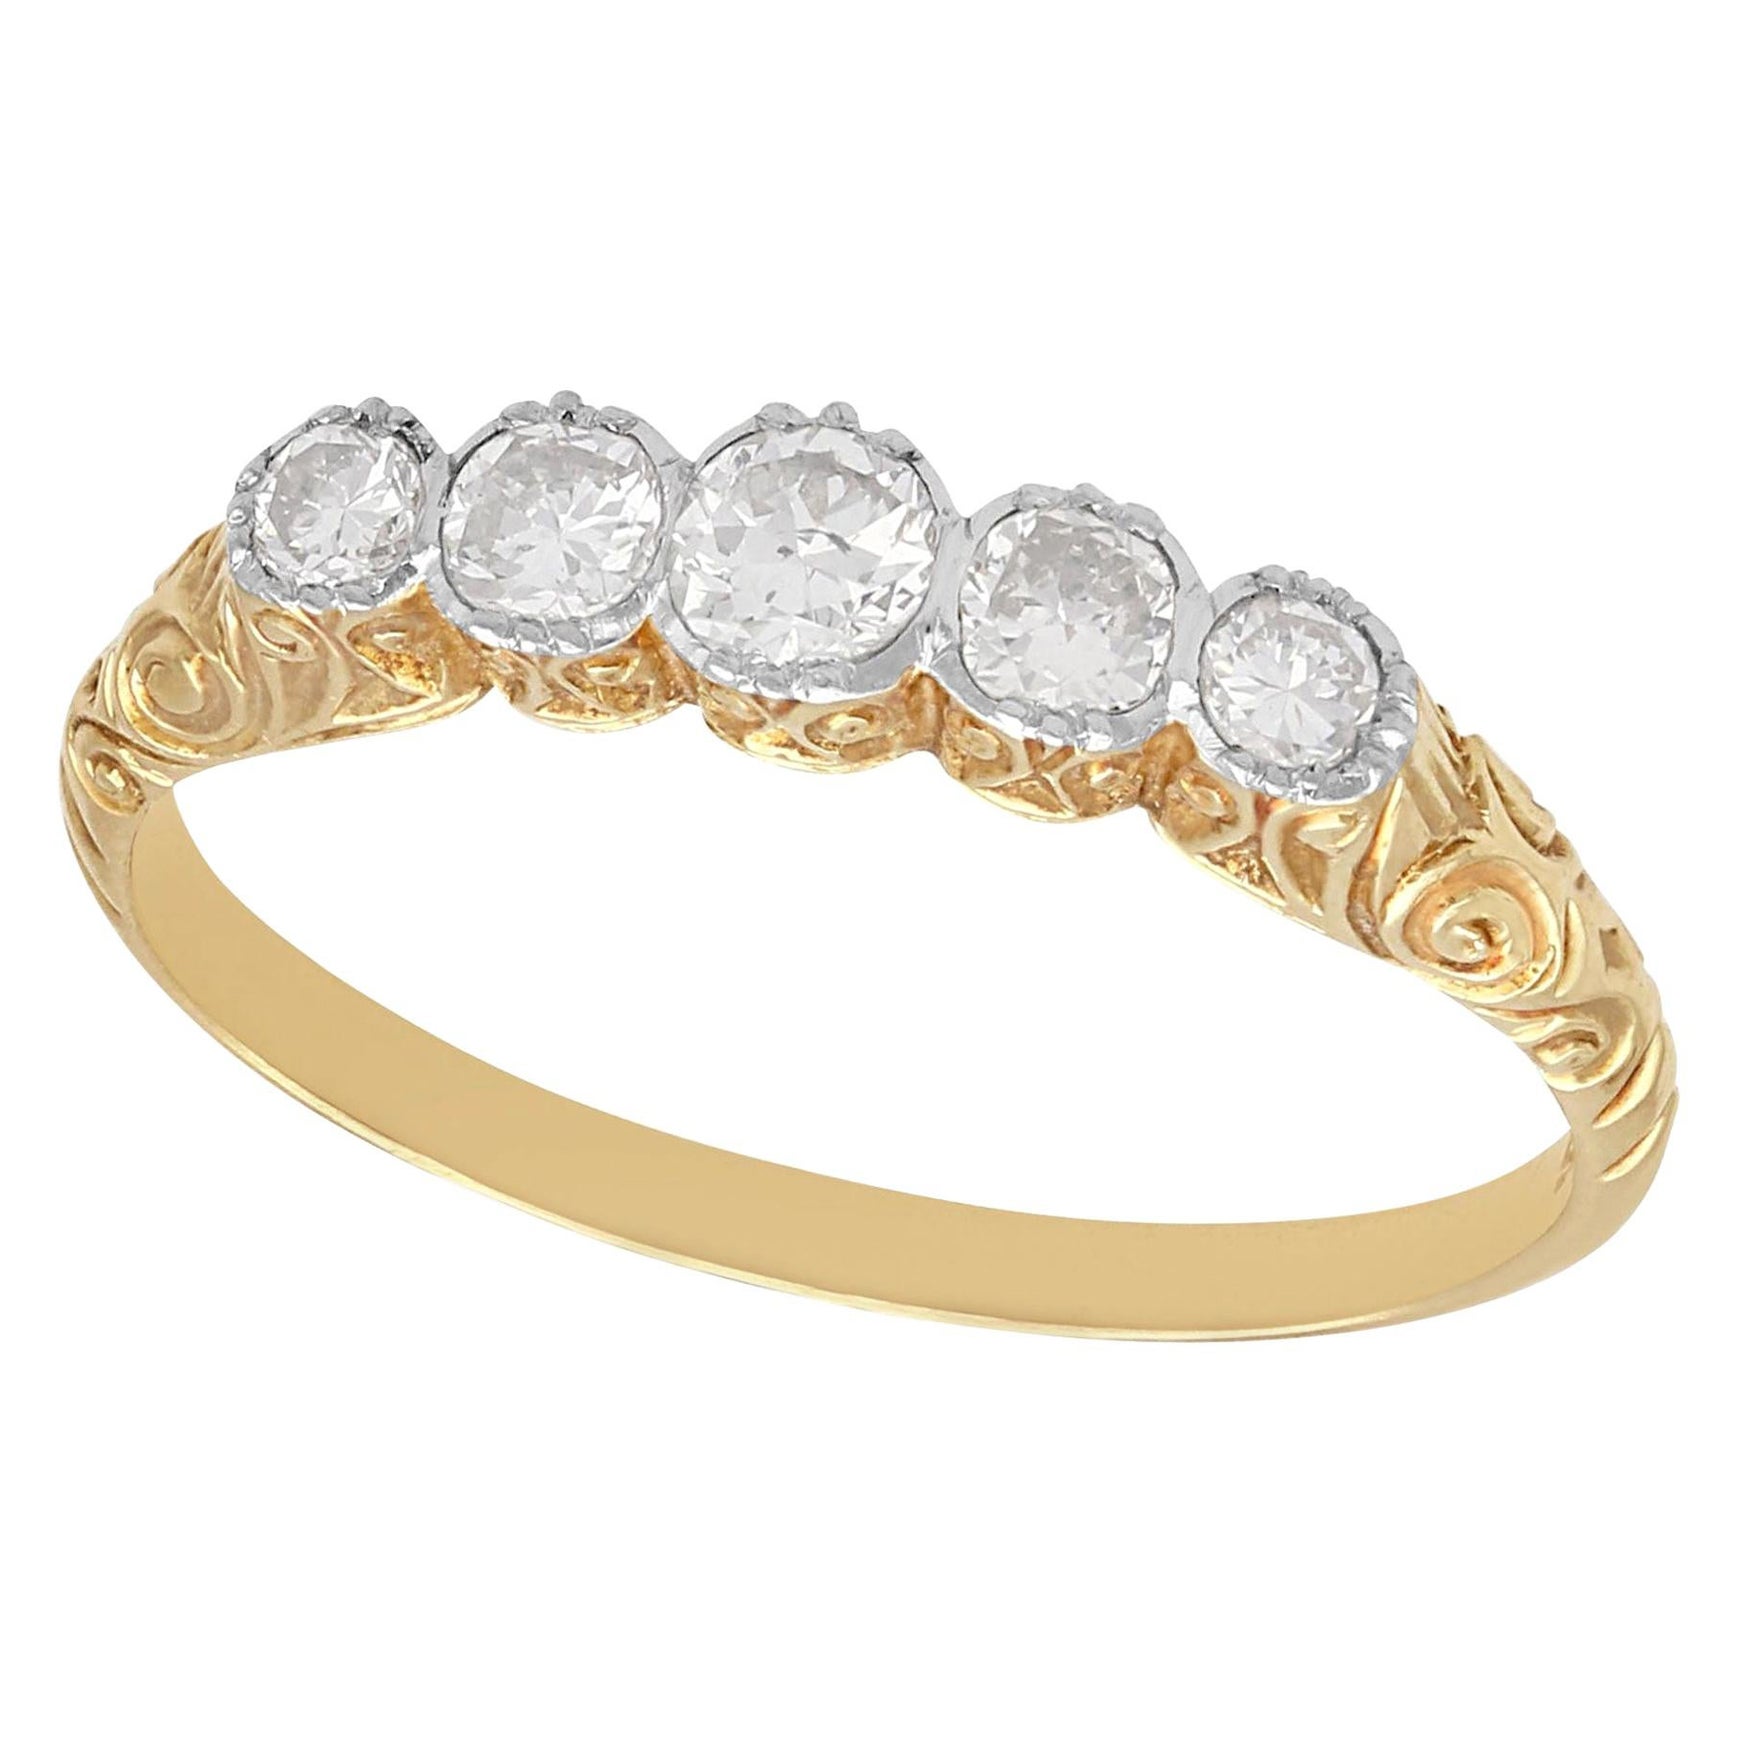 1920s Antique Diamond and Yellow Gold Five-Stone Ring For Sale at 1stDibs